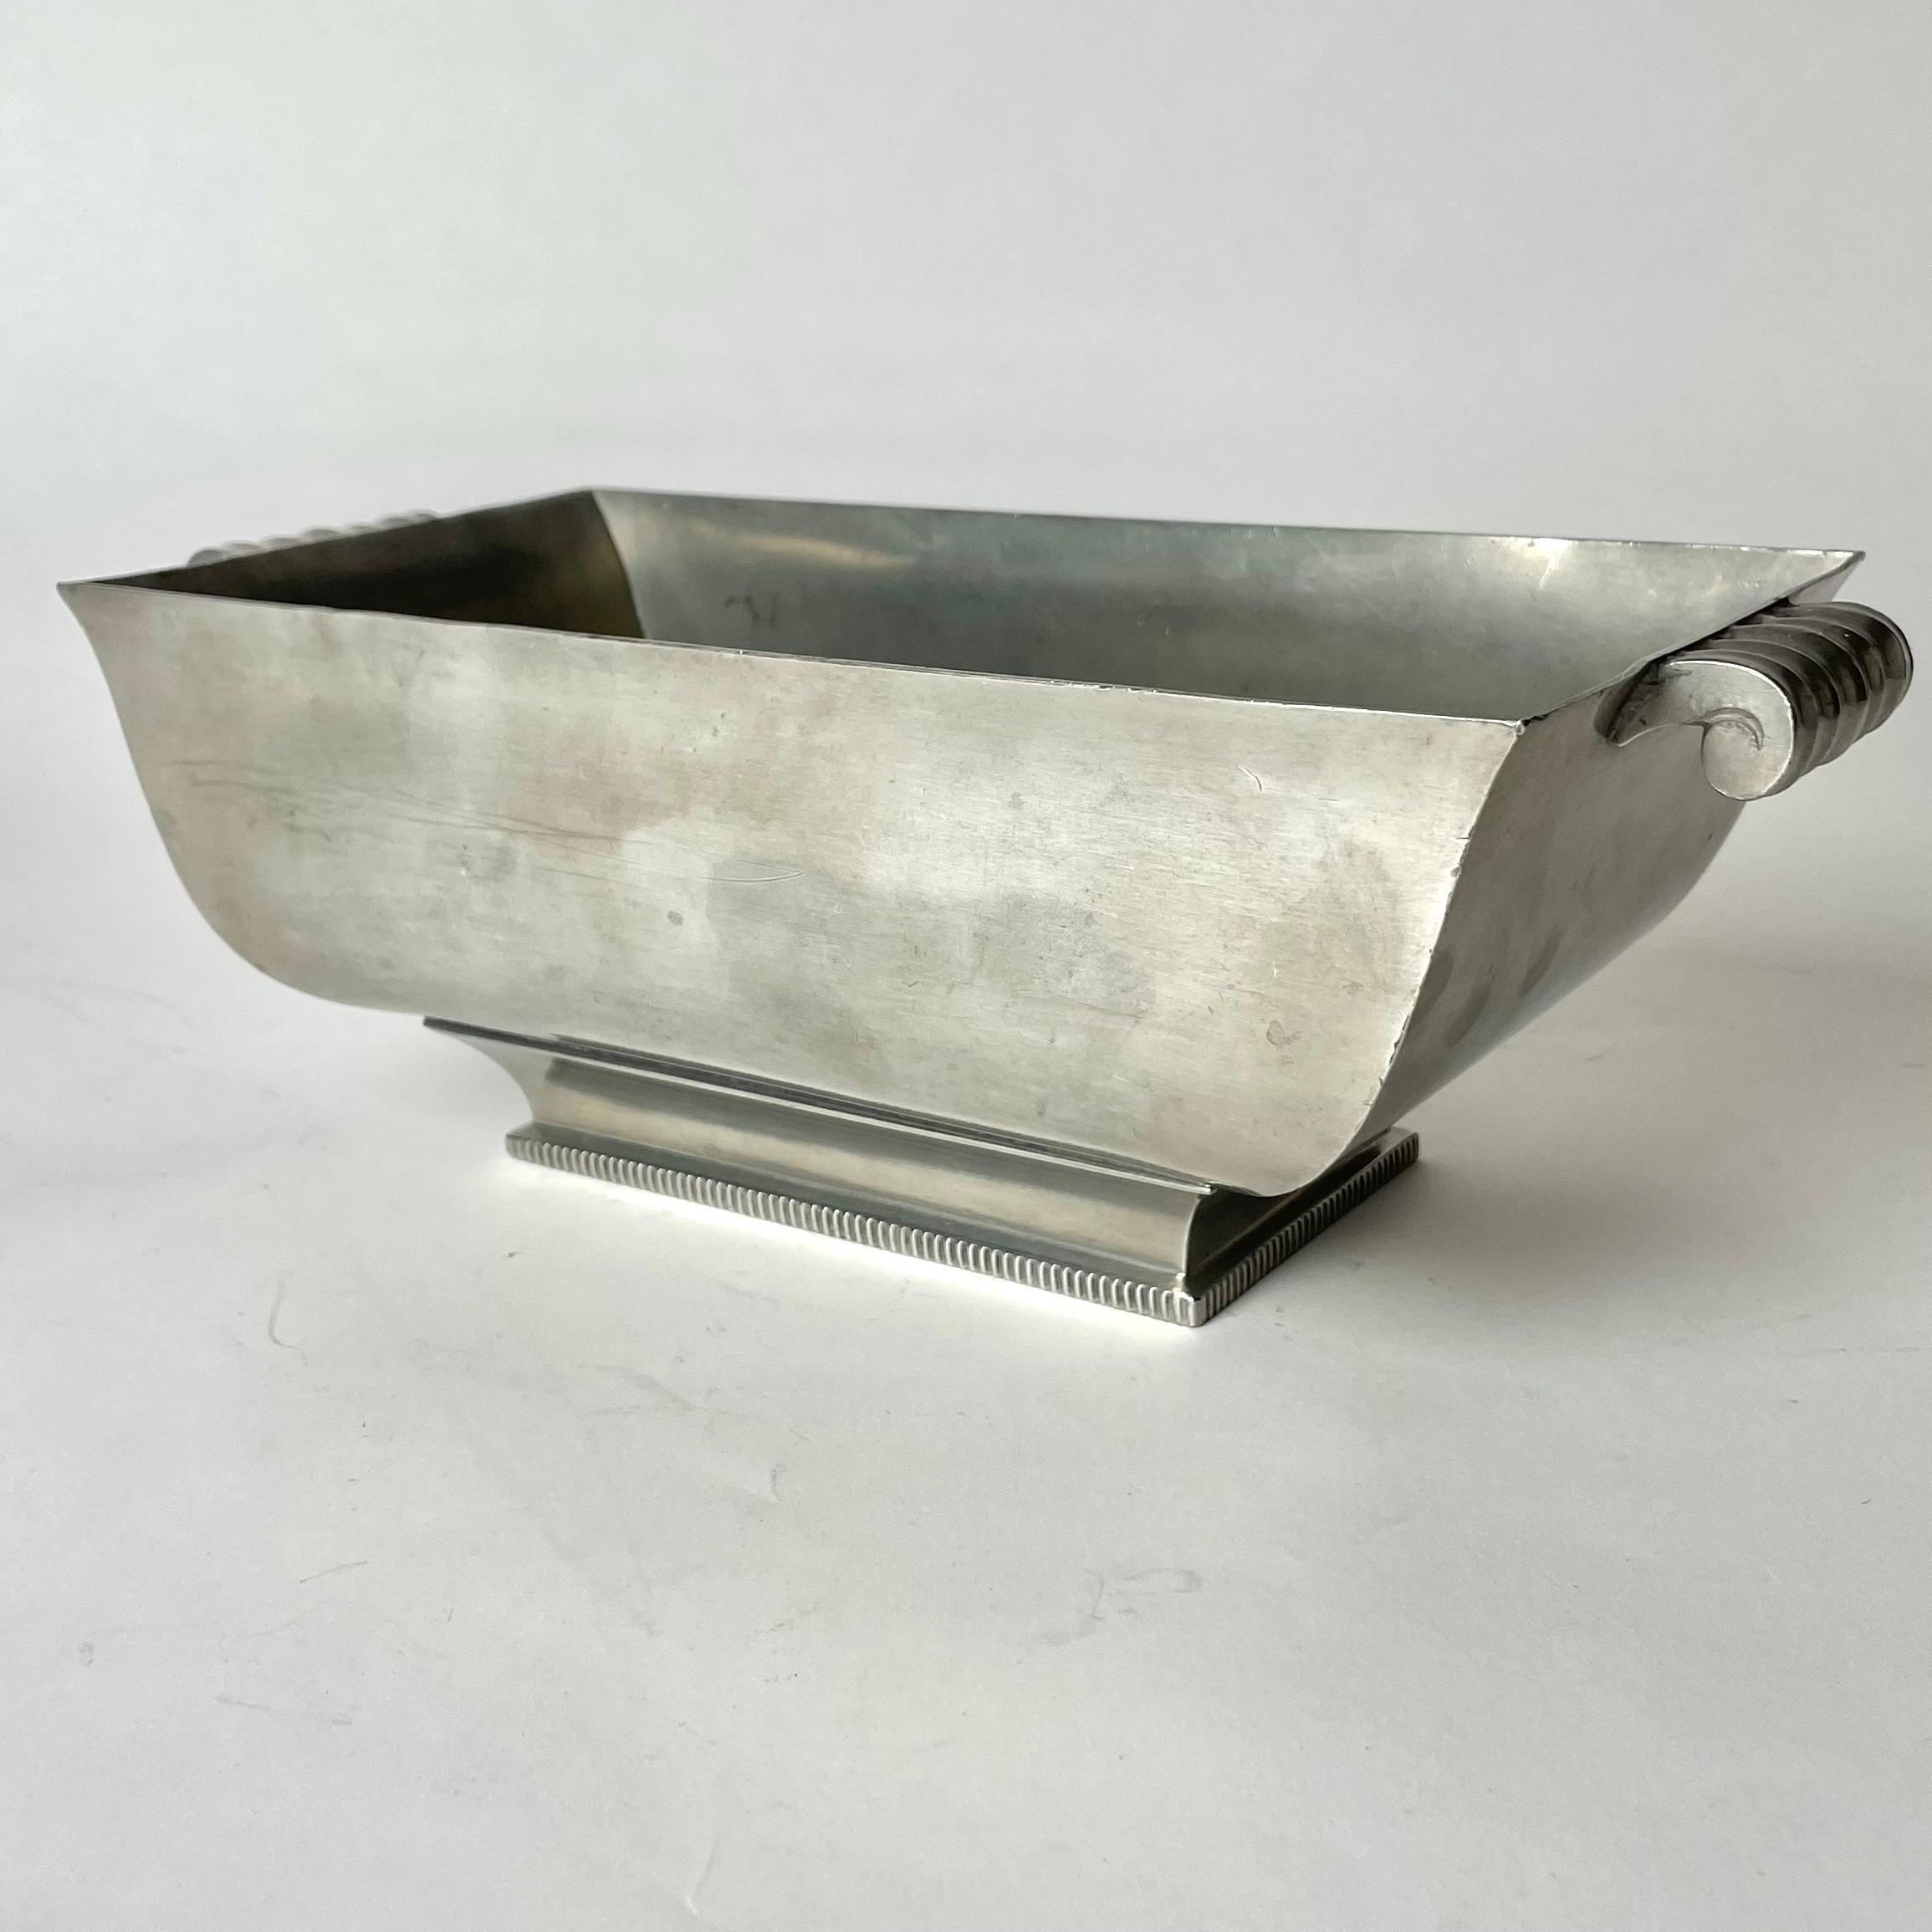 Elegant Jardiniere in Pewter by GAB Guldsmedsaktiebolaget, Sweden. Typical Swedish Art Deco / Swedish Grace and marked GAB TENN (pewter) and G8 which means it was manufactured in 1933.

Wear consistent with age and use